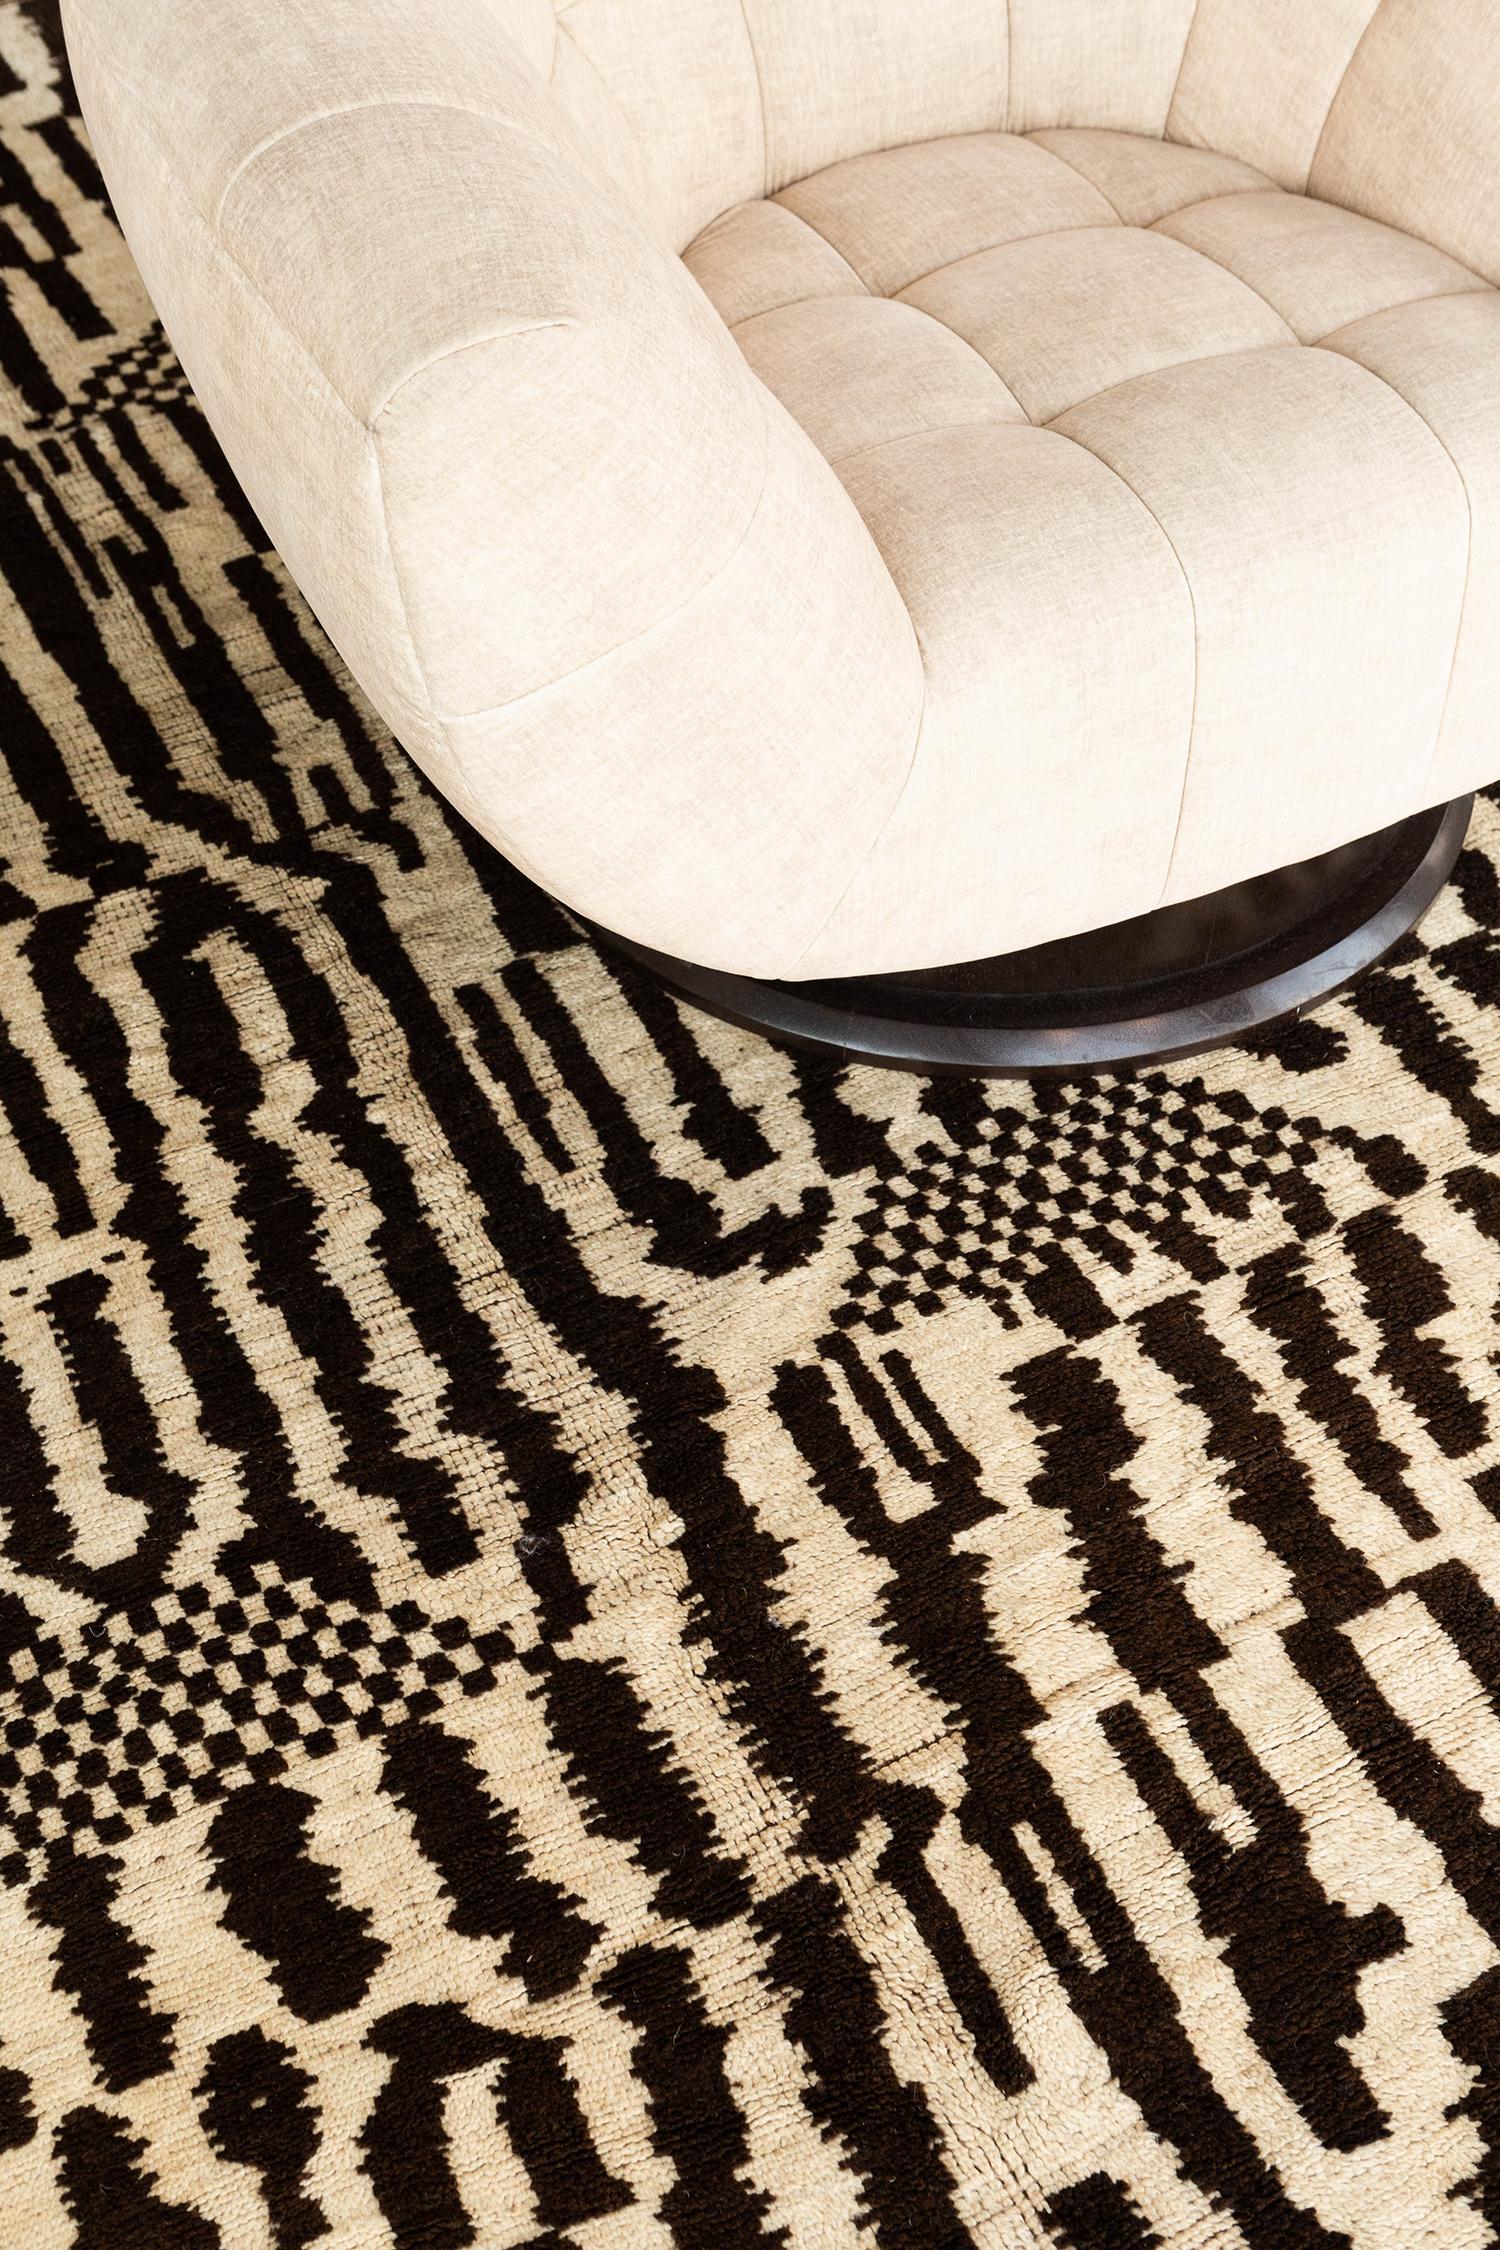 A bold and exciting vintage Moroccan from the High Atlas tribes of Morocco. This brown and cream colored wool pile weave contains tribal elements and symbolic imagery to make for the perfect contemporary. An antique art piece that will leave lasting